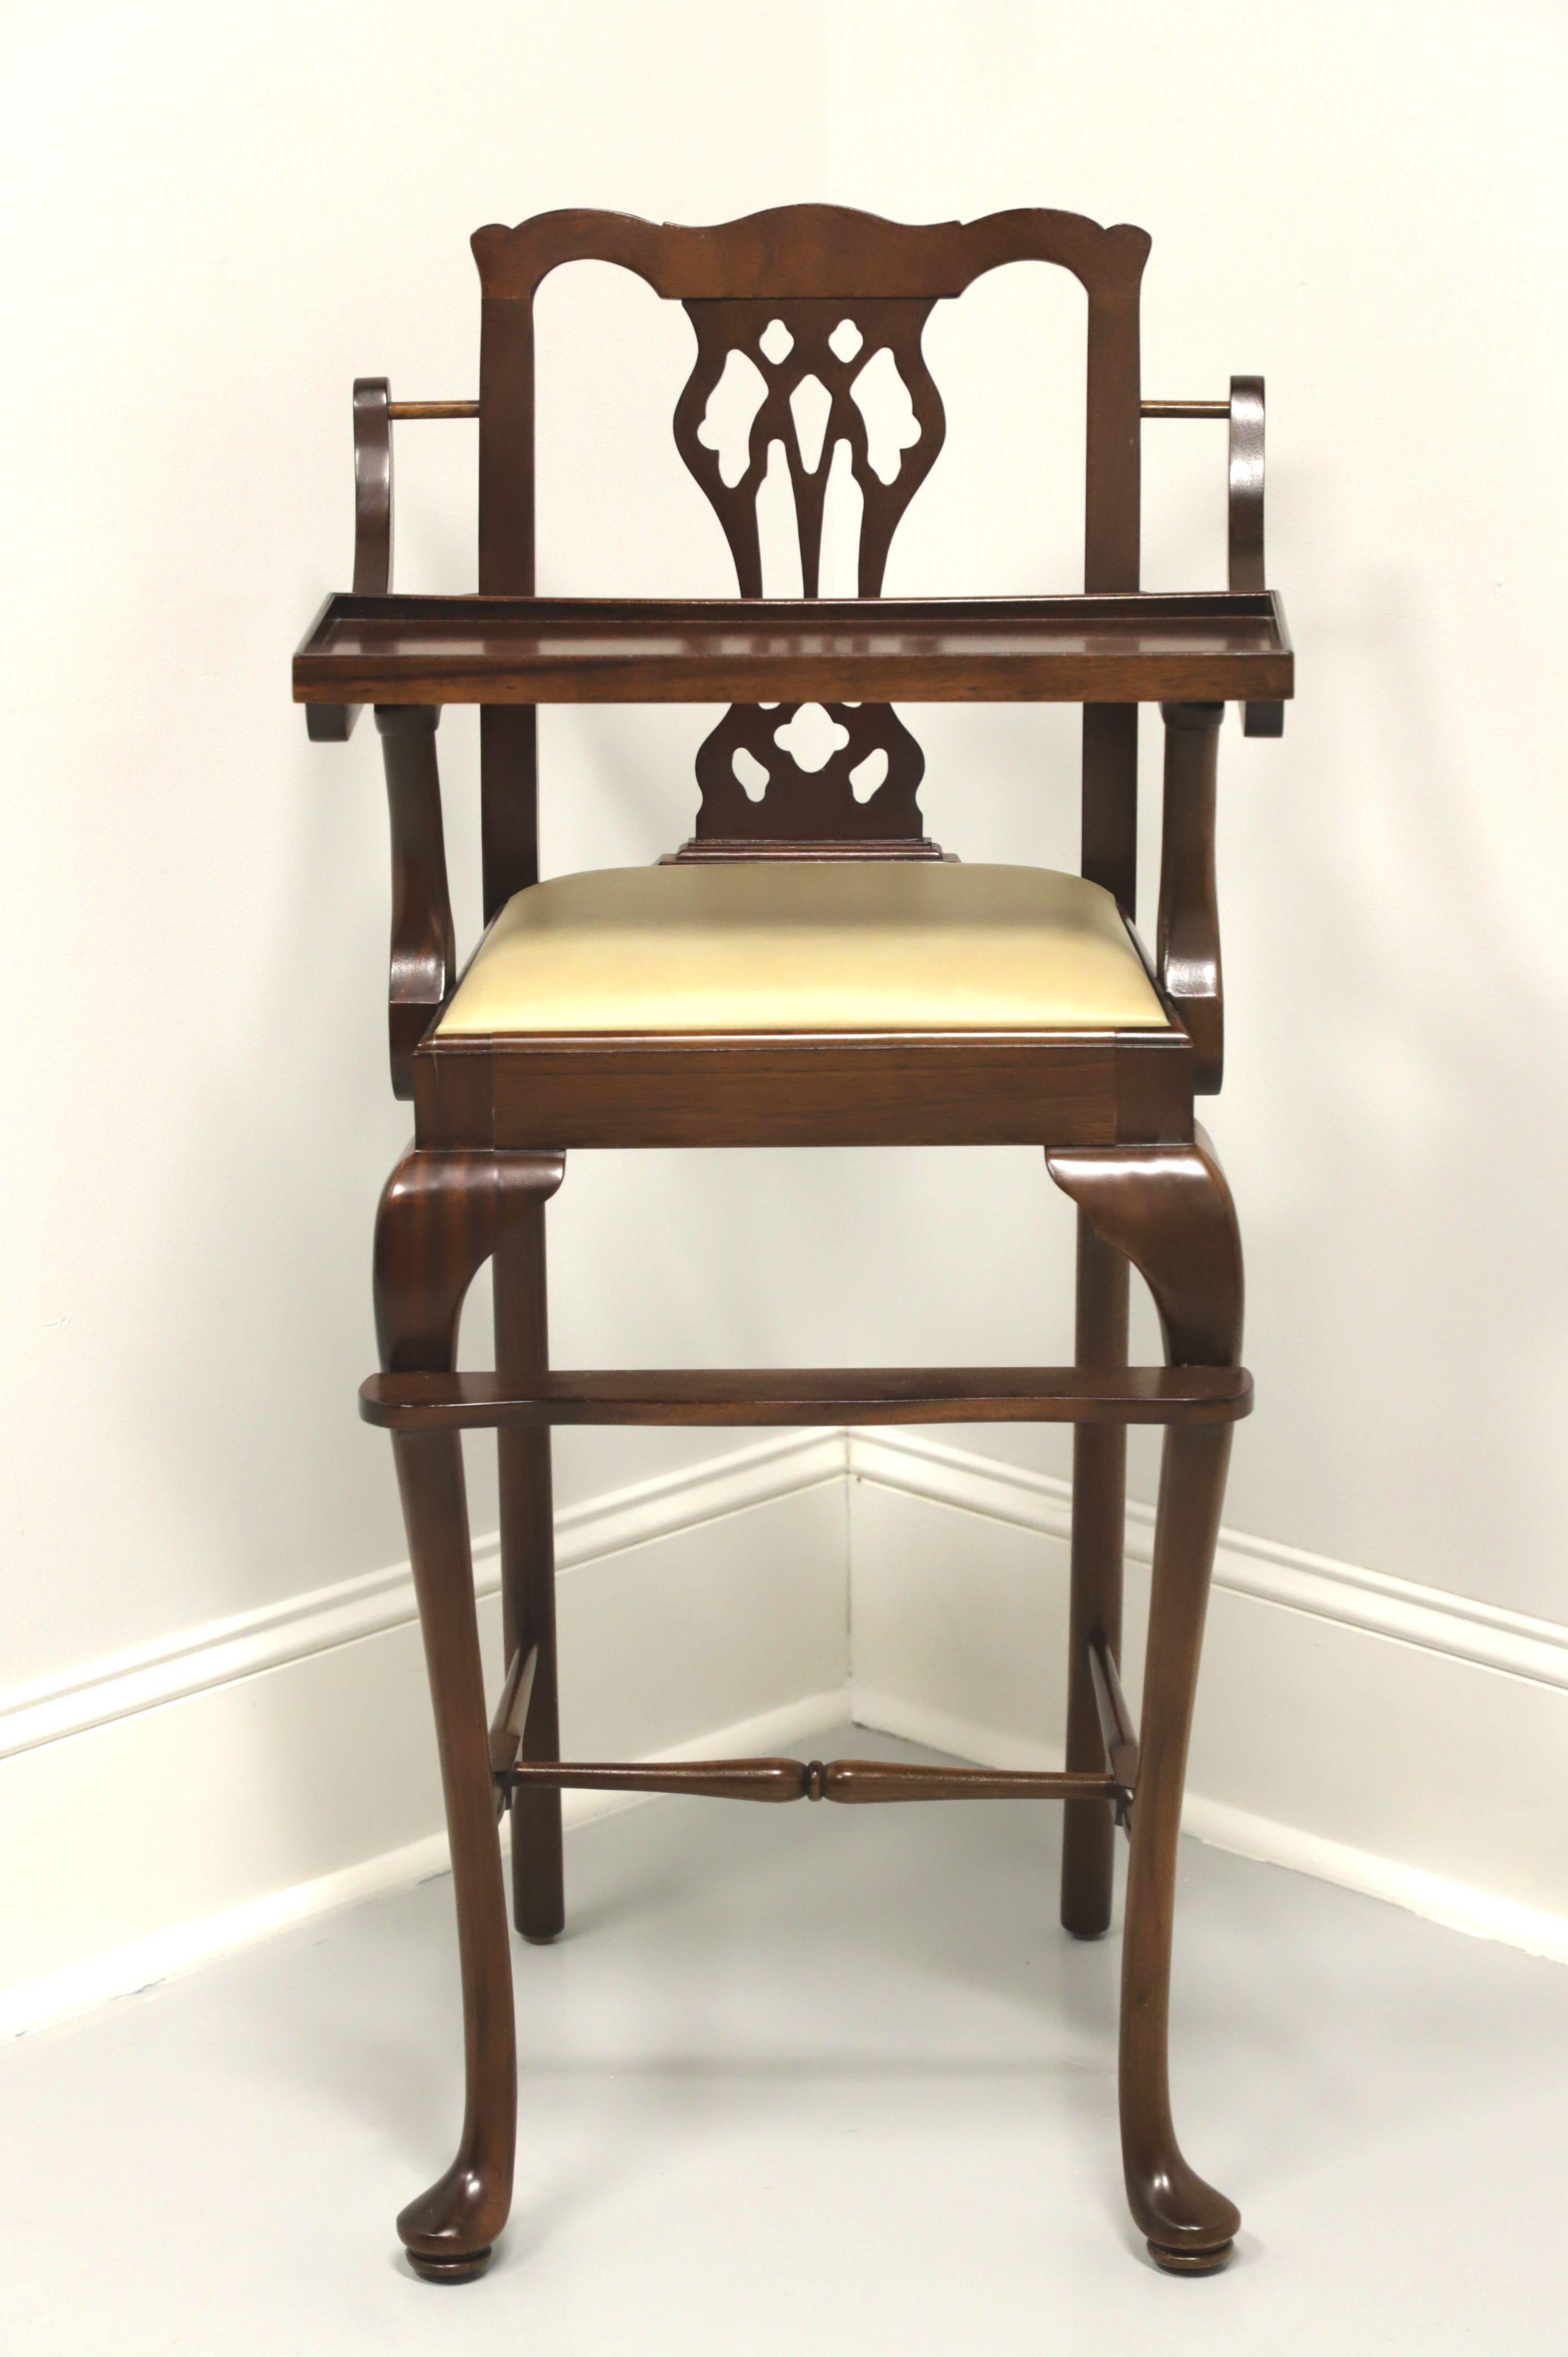 A Queen Anne style child's high chair by Madison Square, of Hanover, Pennsylvania, USA. Solid mahogany with carvied crestrail & backrest, removable fold-up tray, vinyl upholstered seat, foot rest, cabriole legs, stretchers and pad feet. Made in the